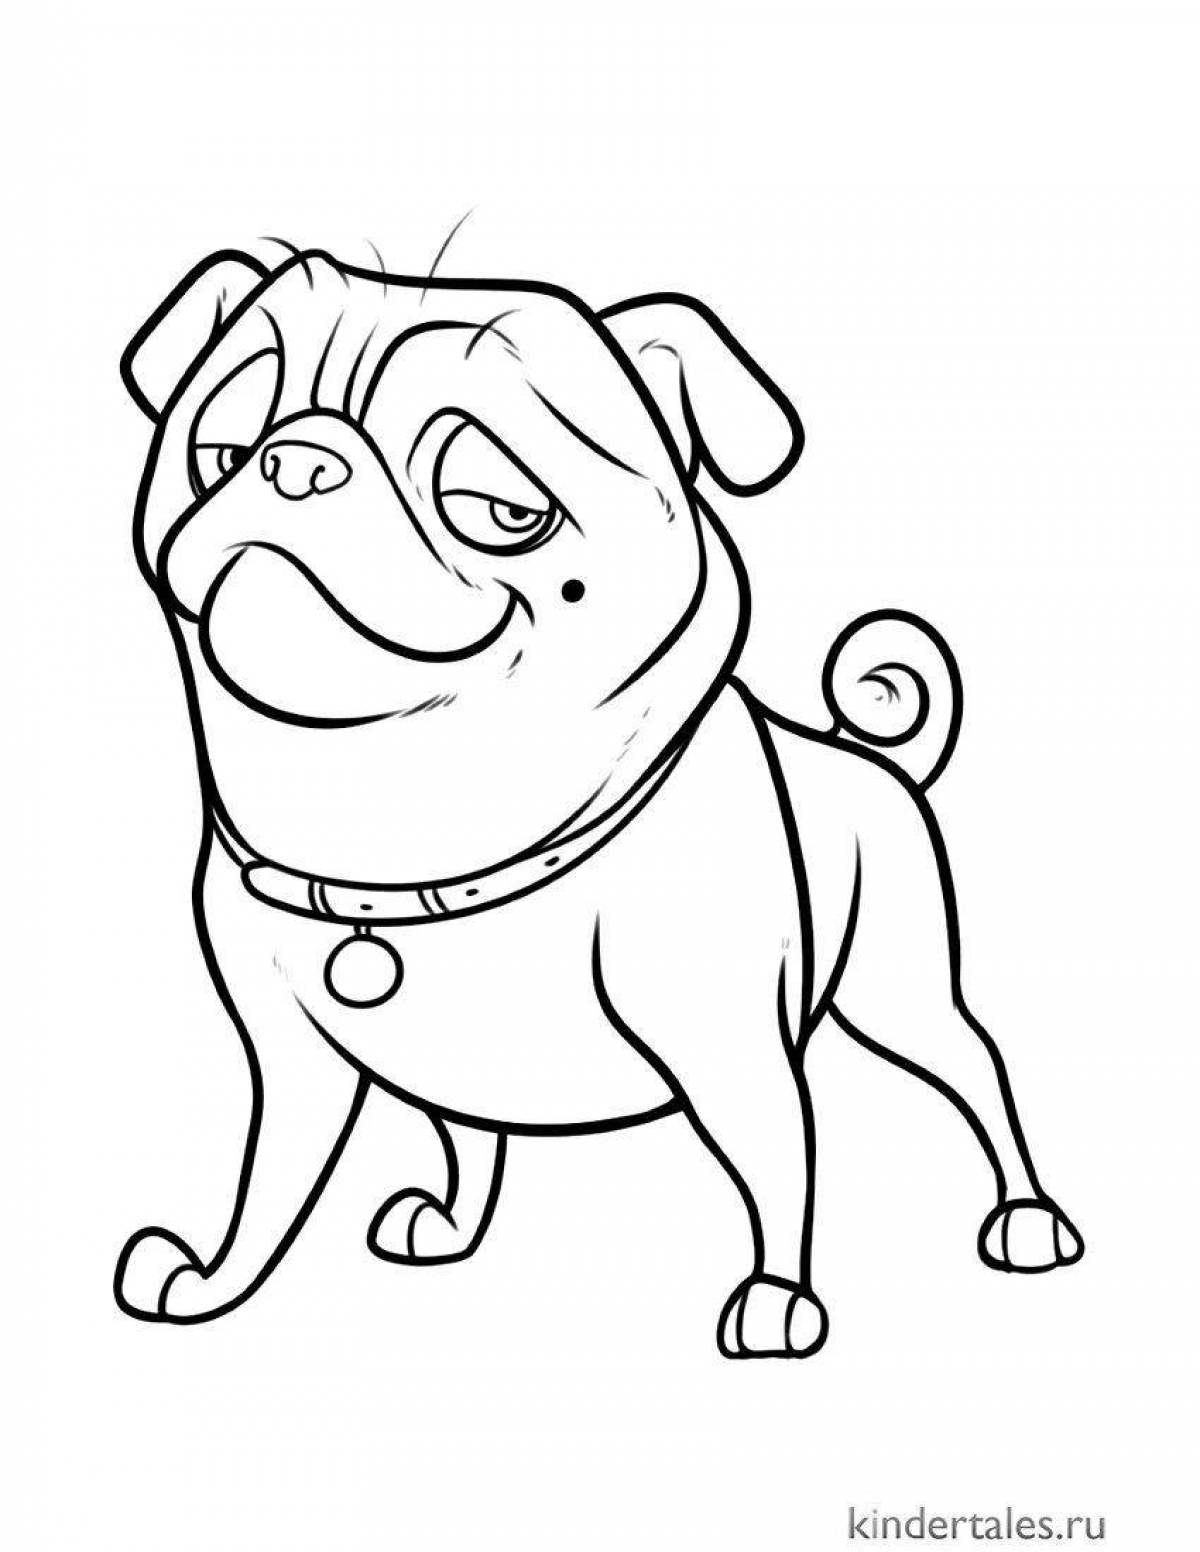 Playful pug coloring page for kids